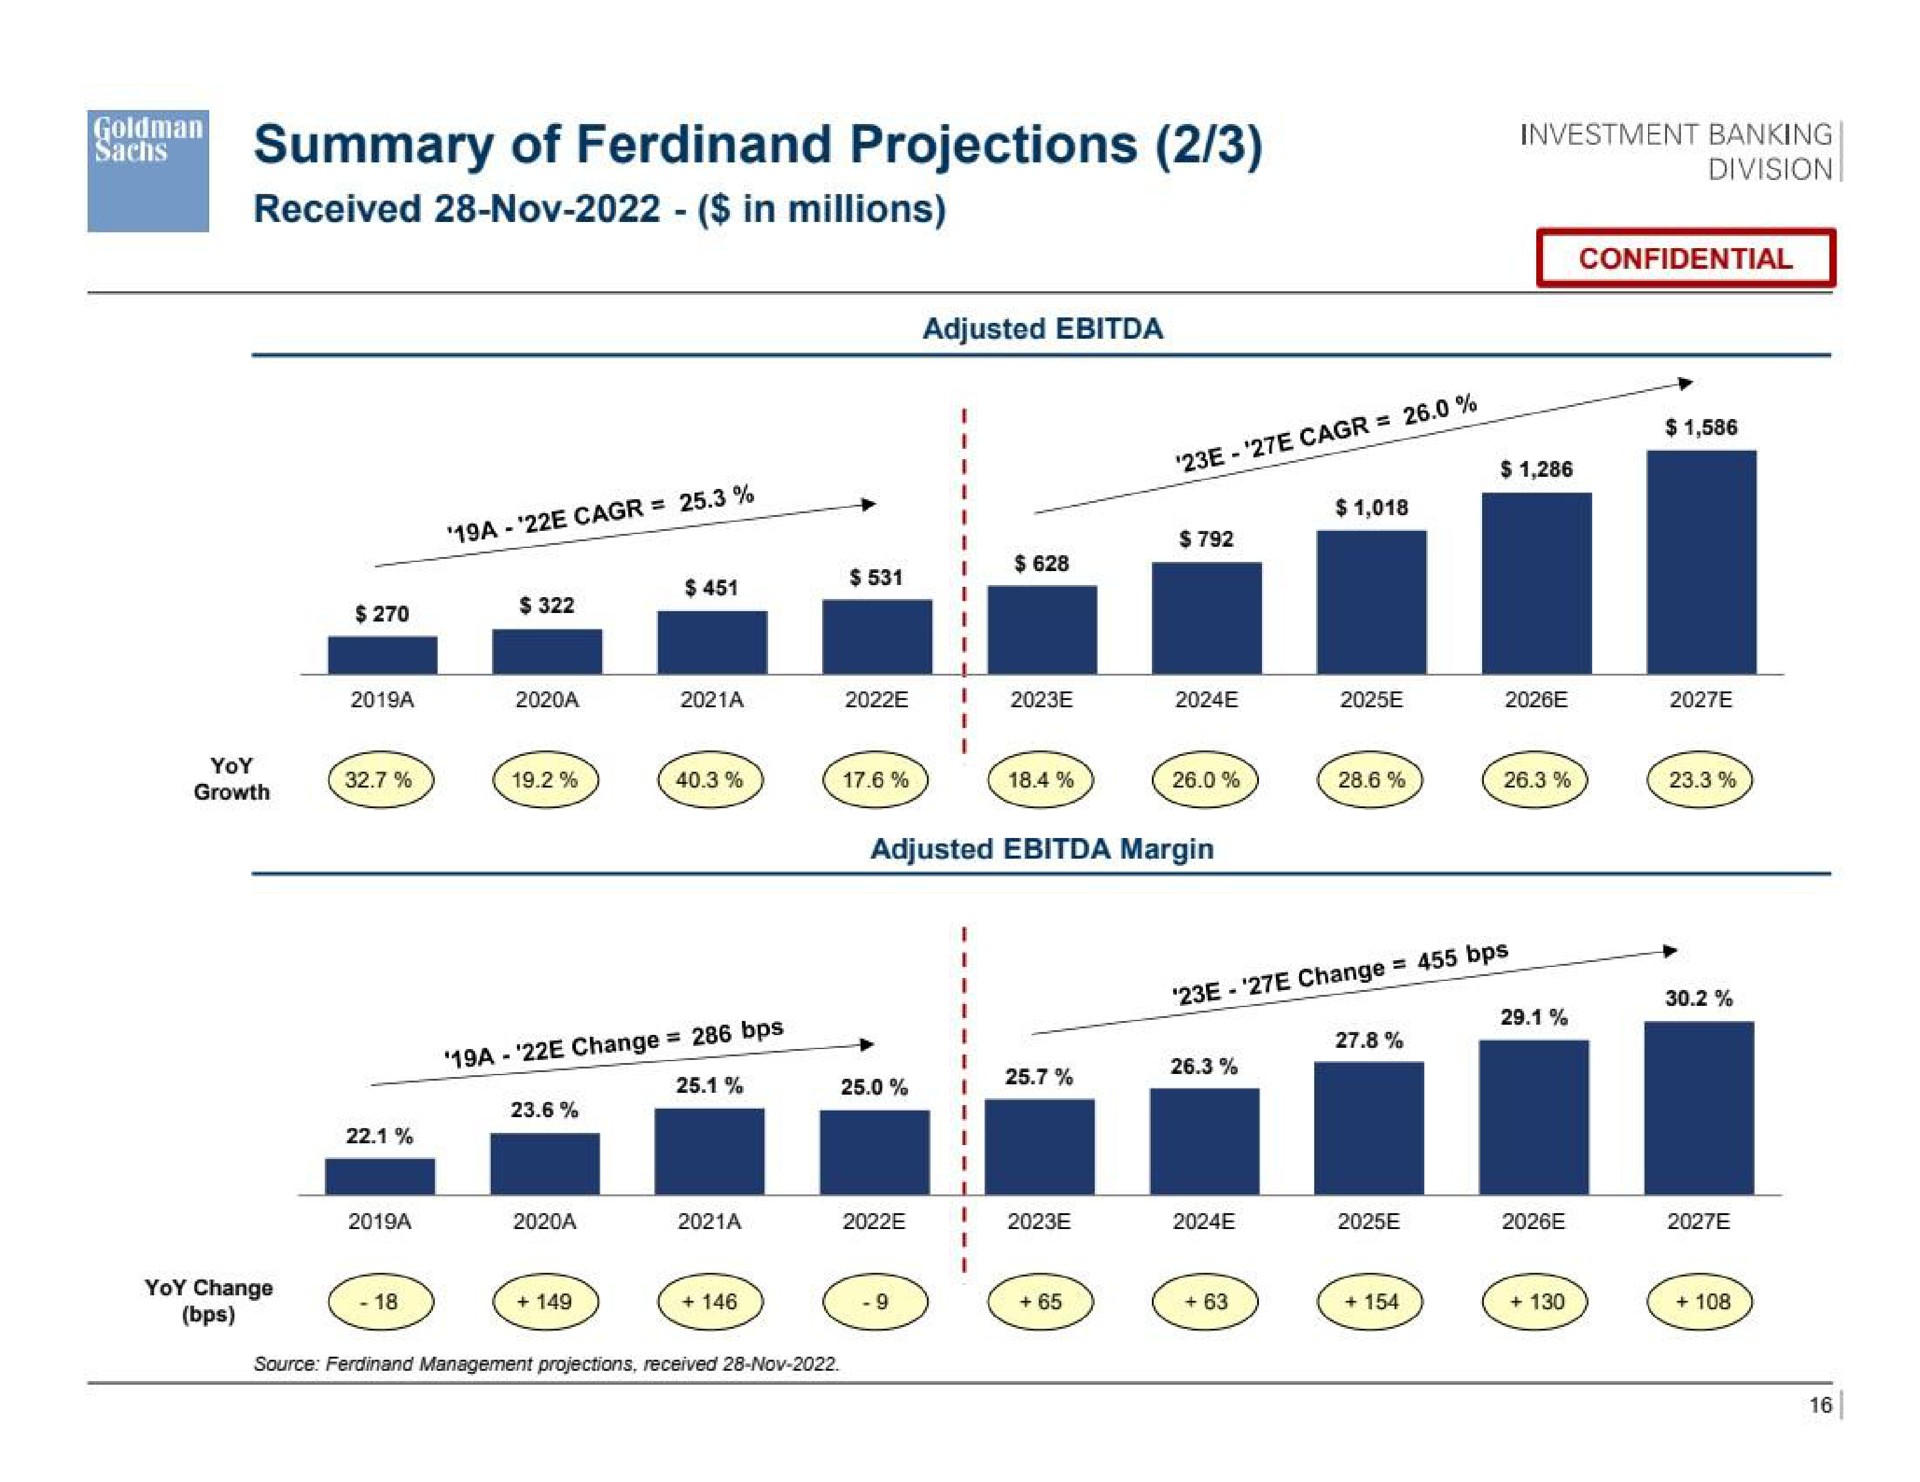 summary of projections investment banking | Goldman Sachs